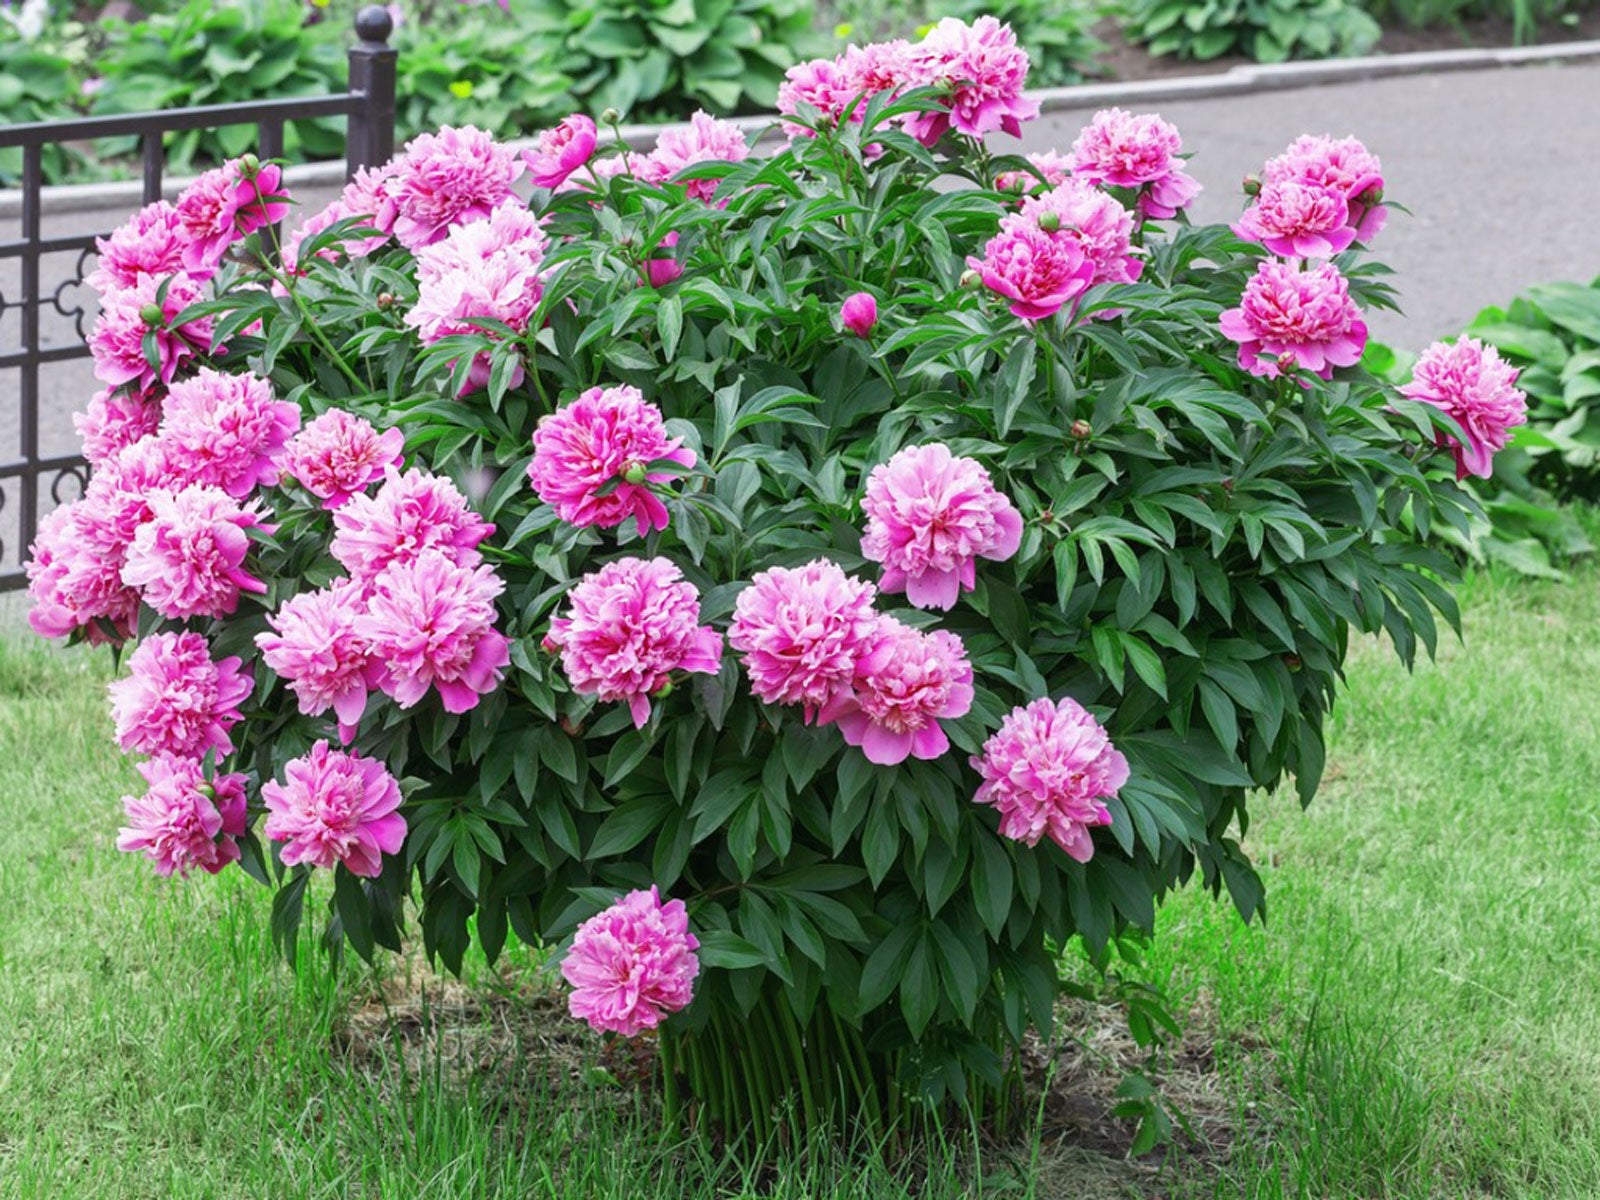 transplanting a peony – can i transplant peonies that are established